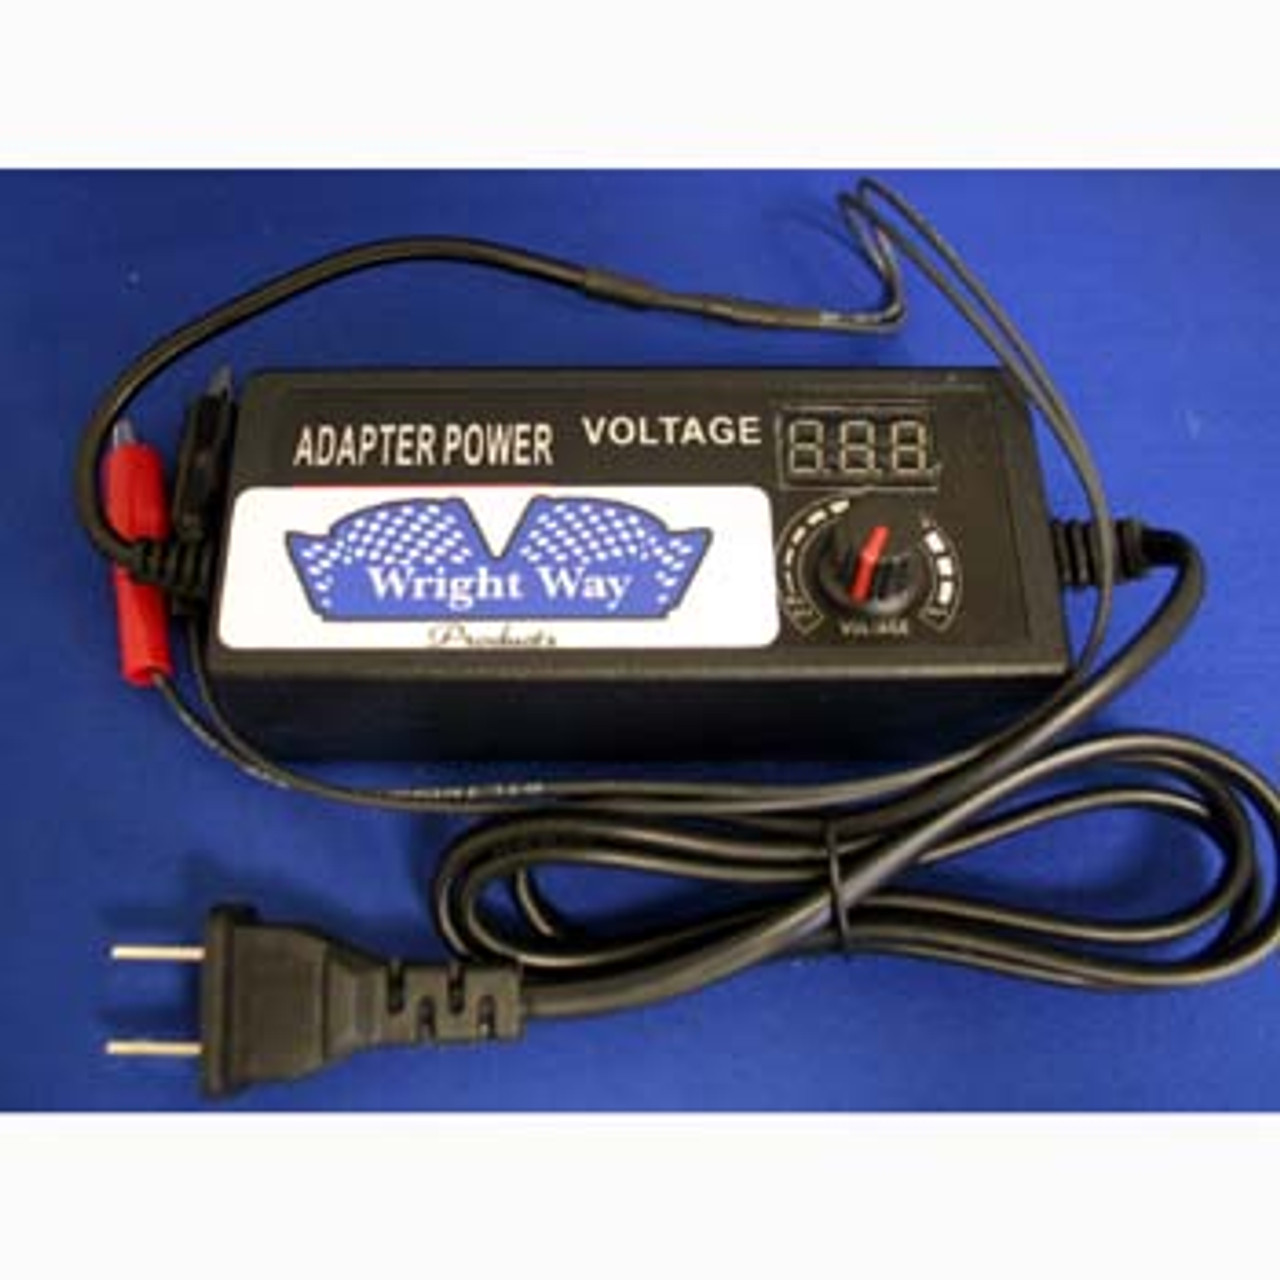 5A Power Supply with digital volt display WWPS5A